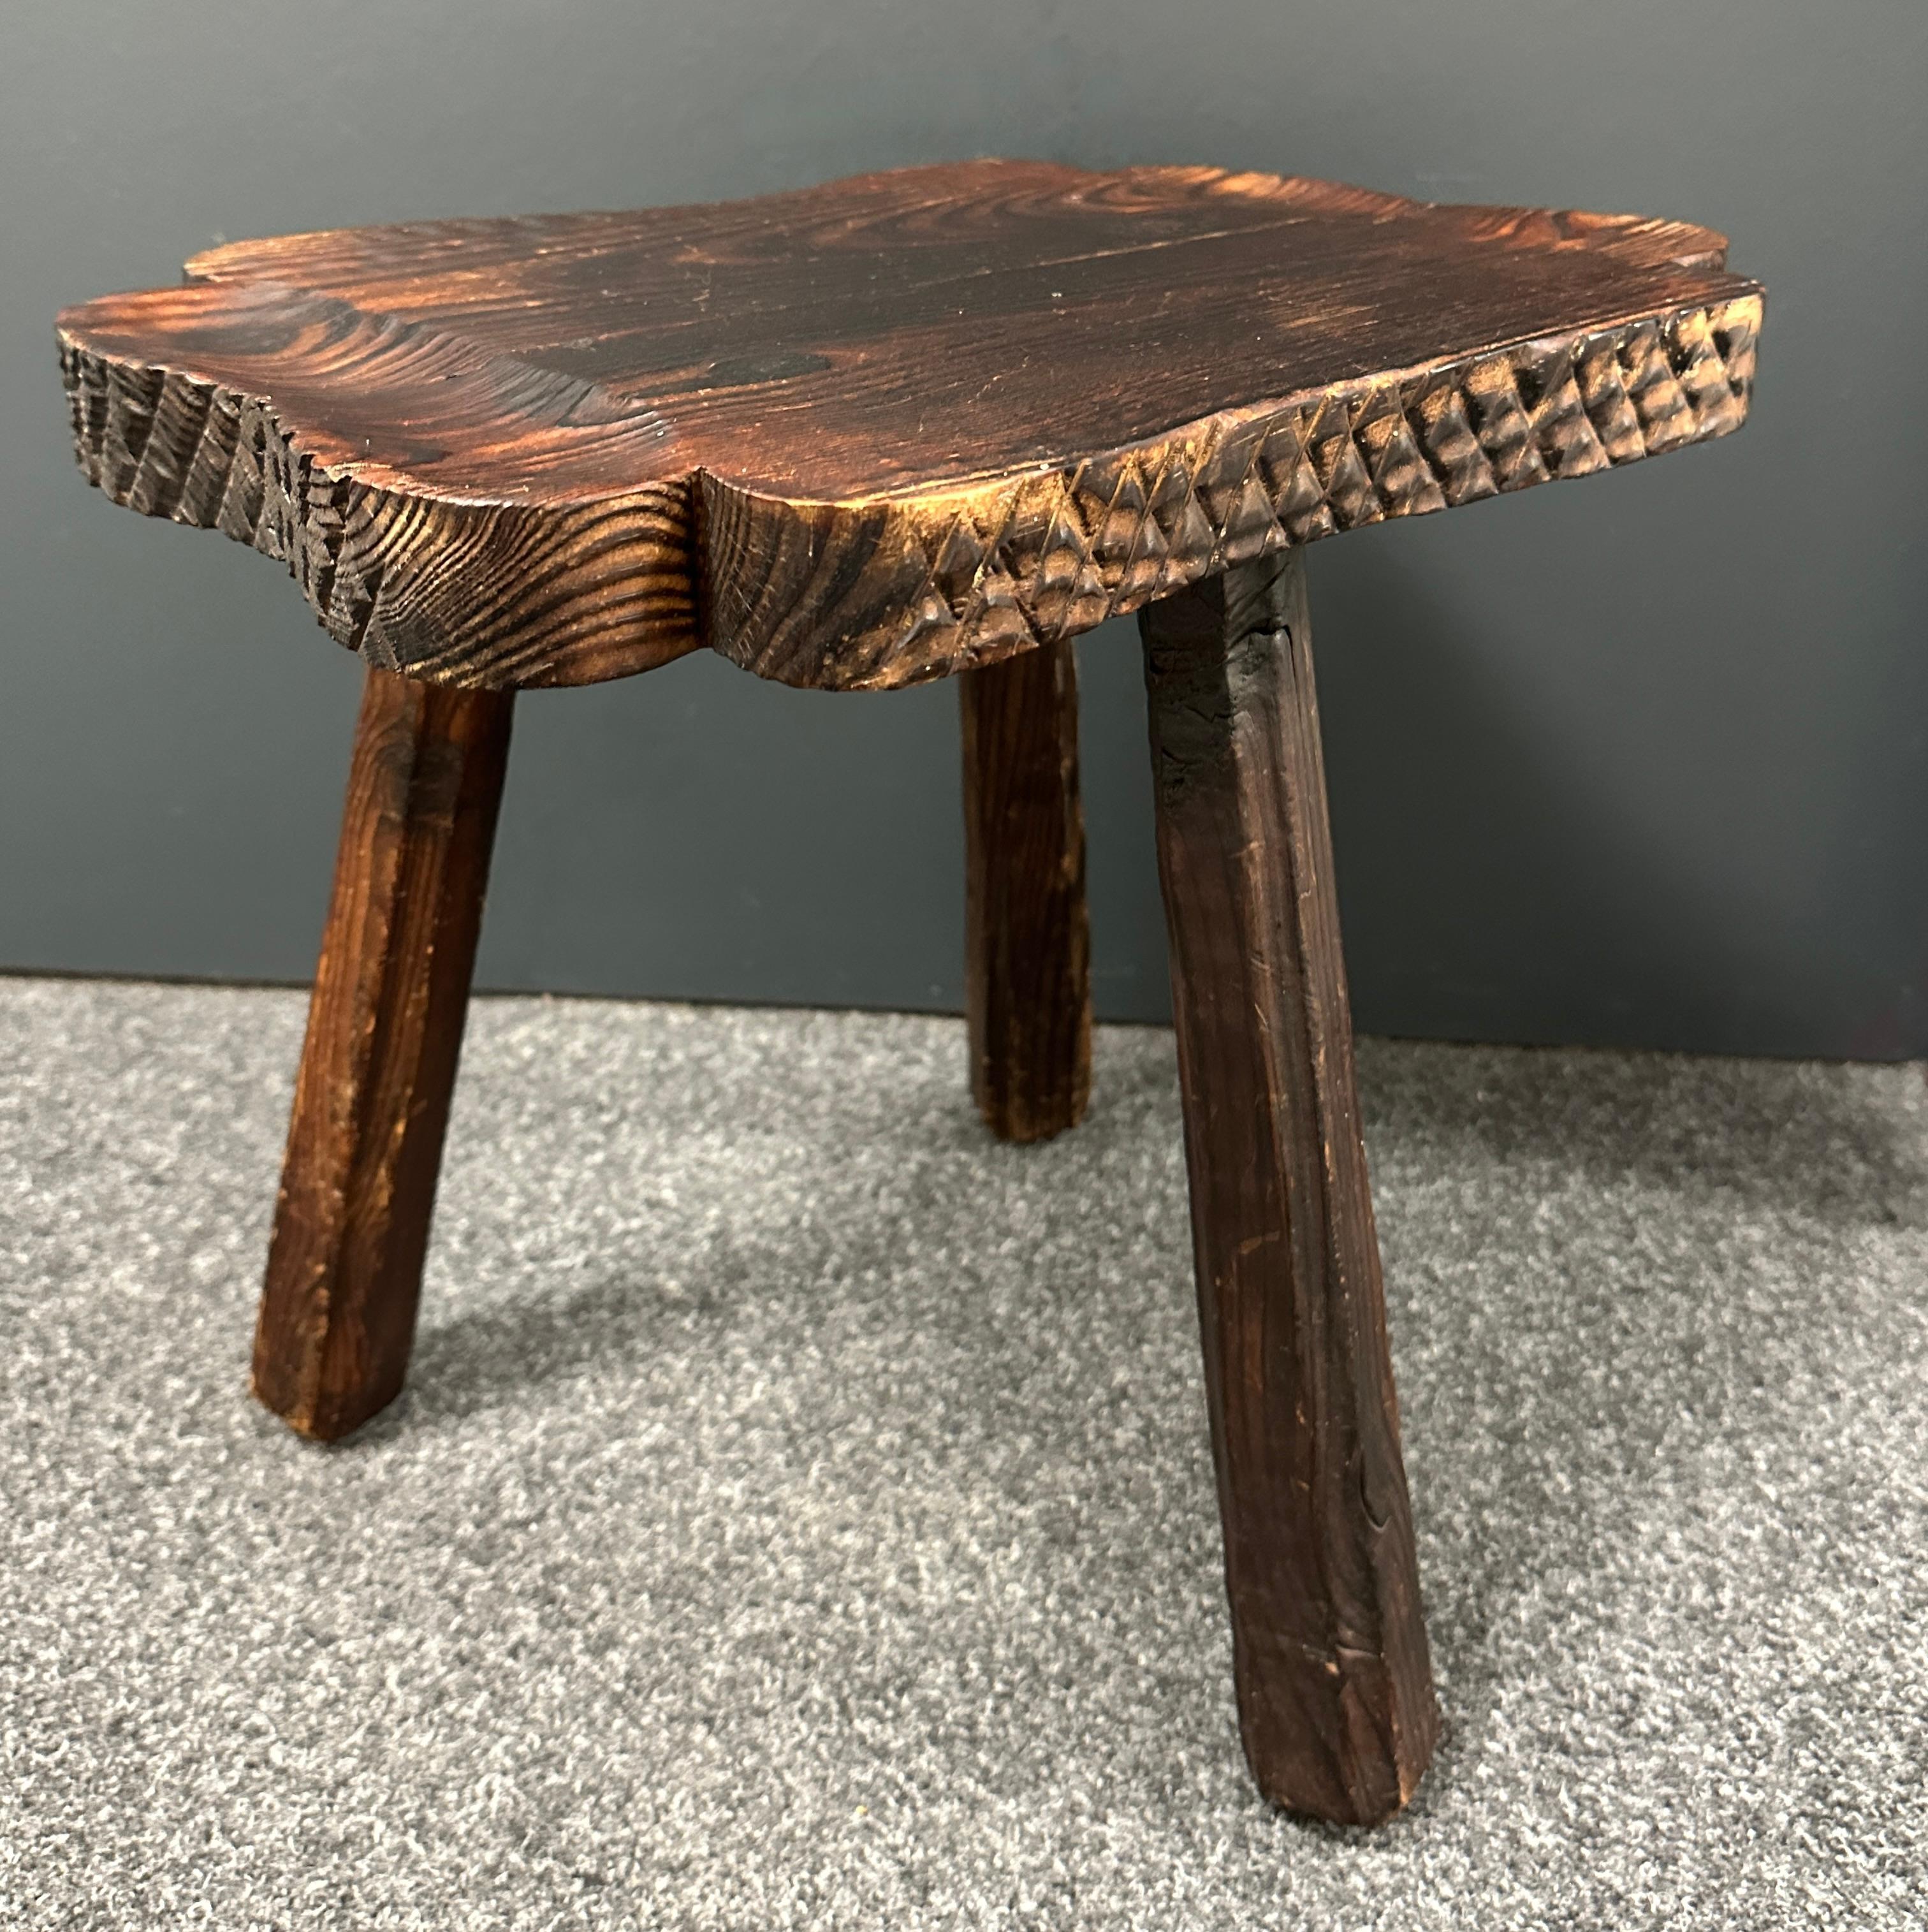 An interesting brutalist stool with hand carved legs and great patina. Great piece of functional sculpture. It is in great vintage condition and is structurally sound. Nice addition to your room, entry hall or patio.